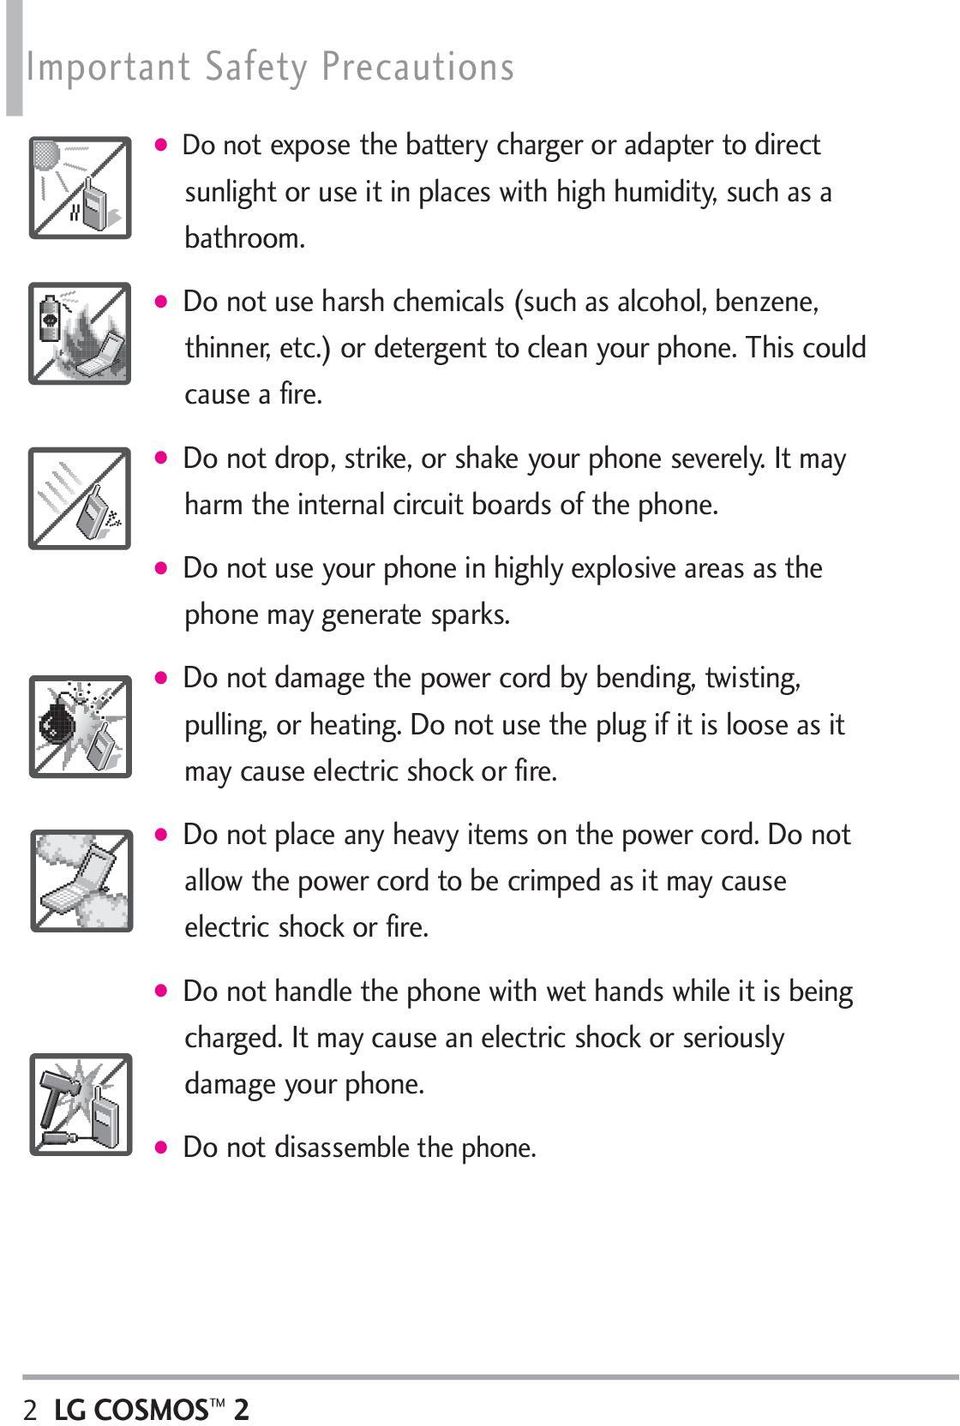 It may harm the internal circuit boards of the phone. Do not use your phone in highly explosive areas as the phone may generate sparks.